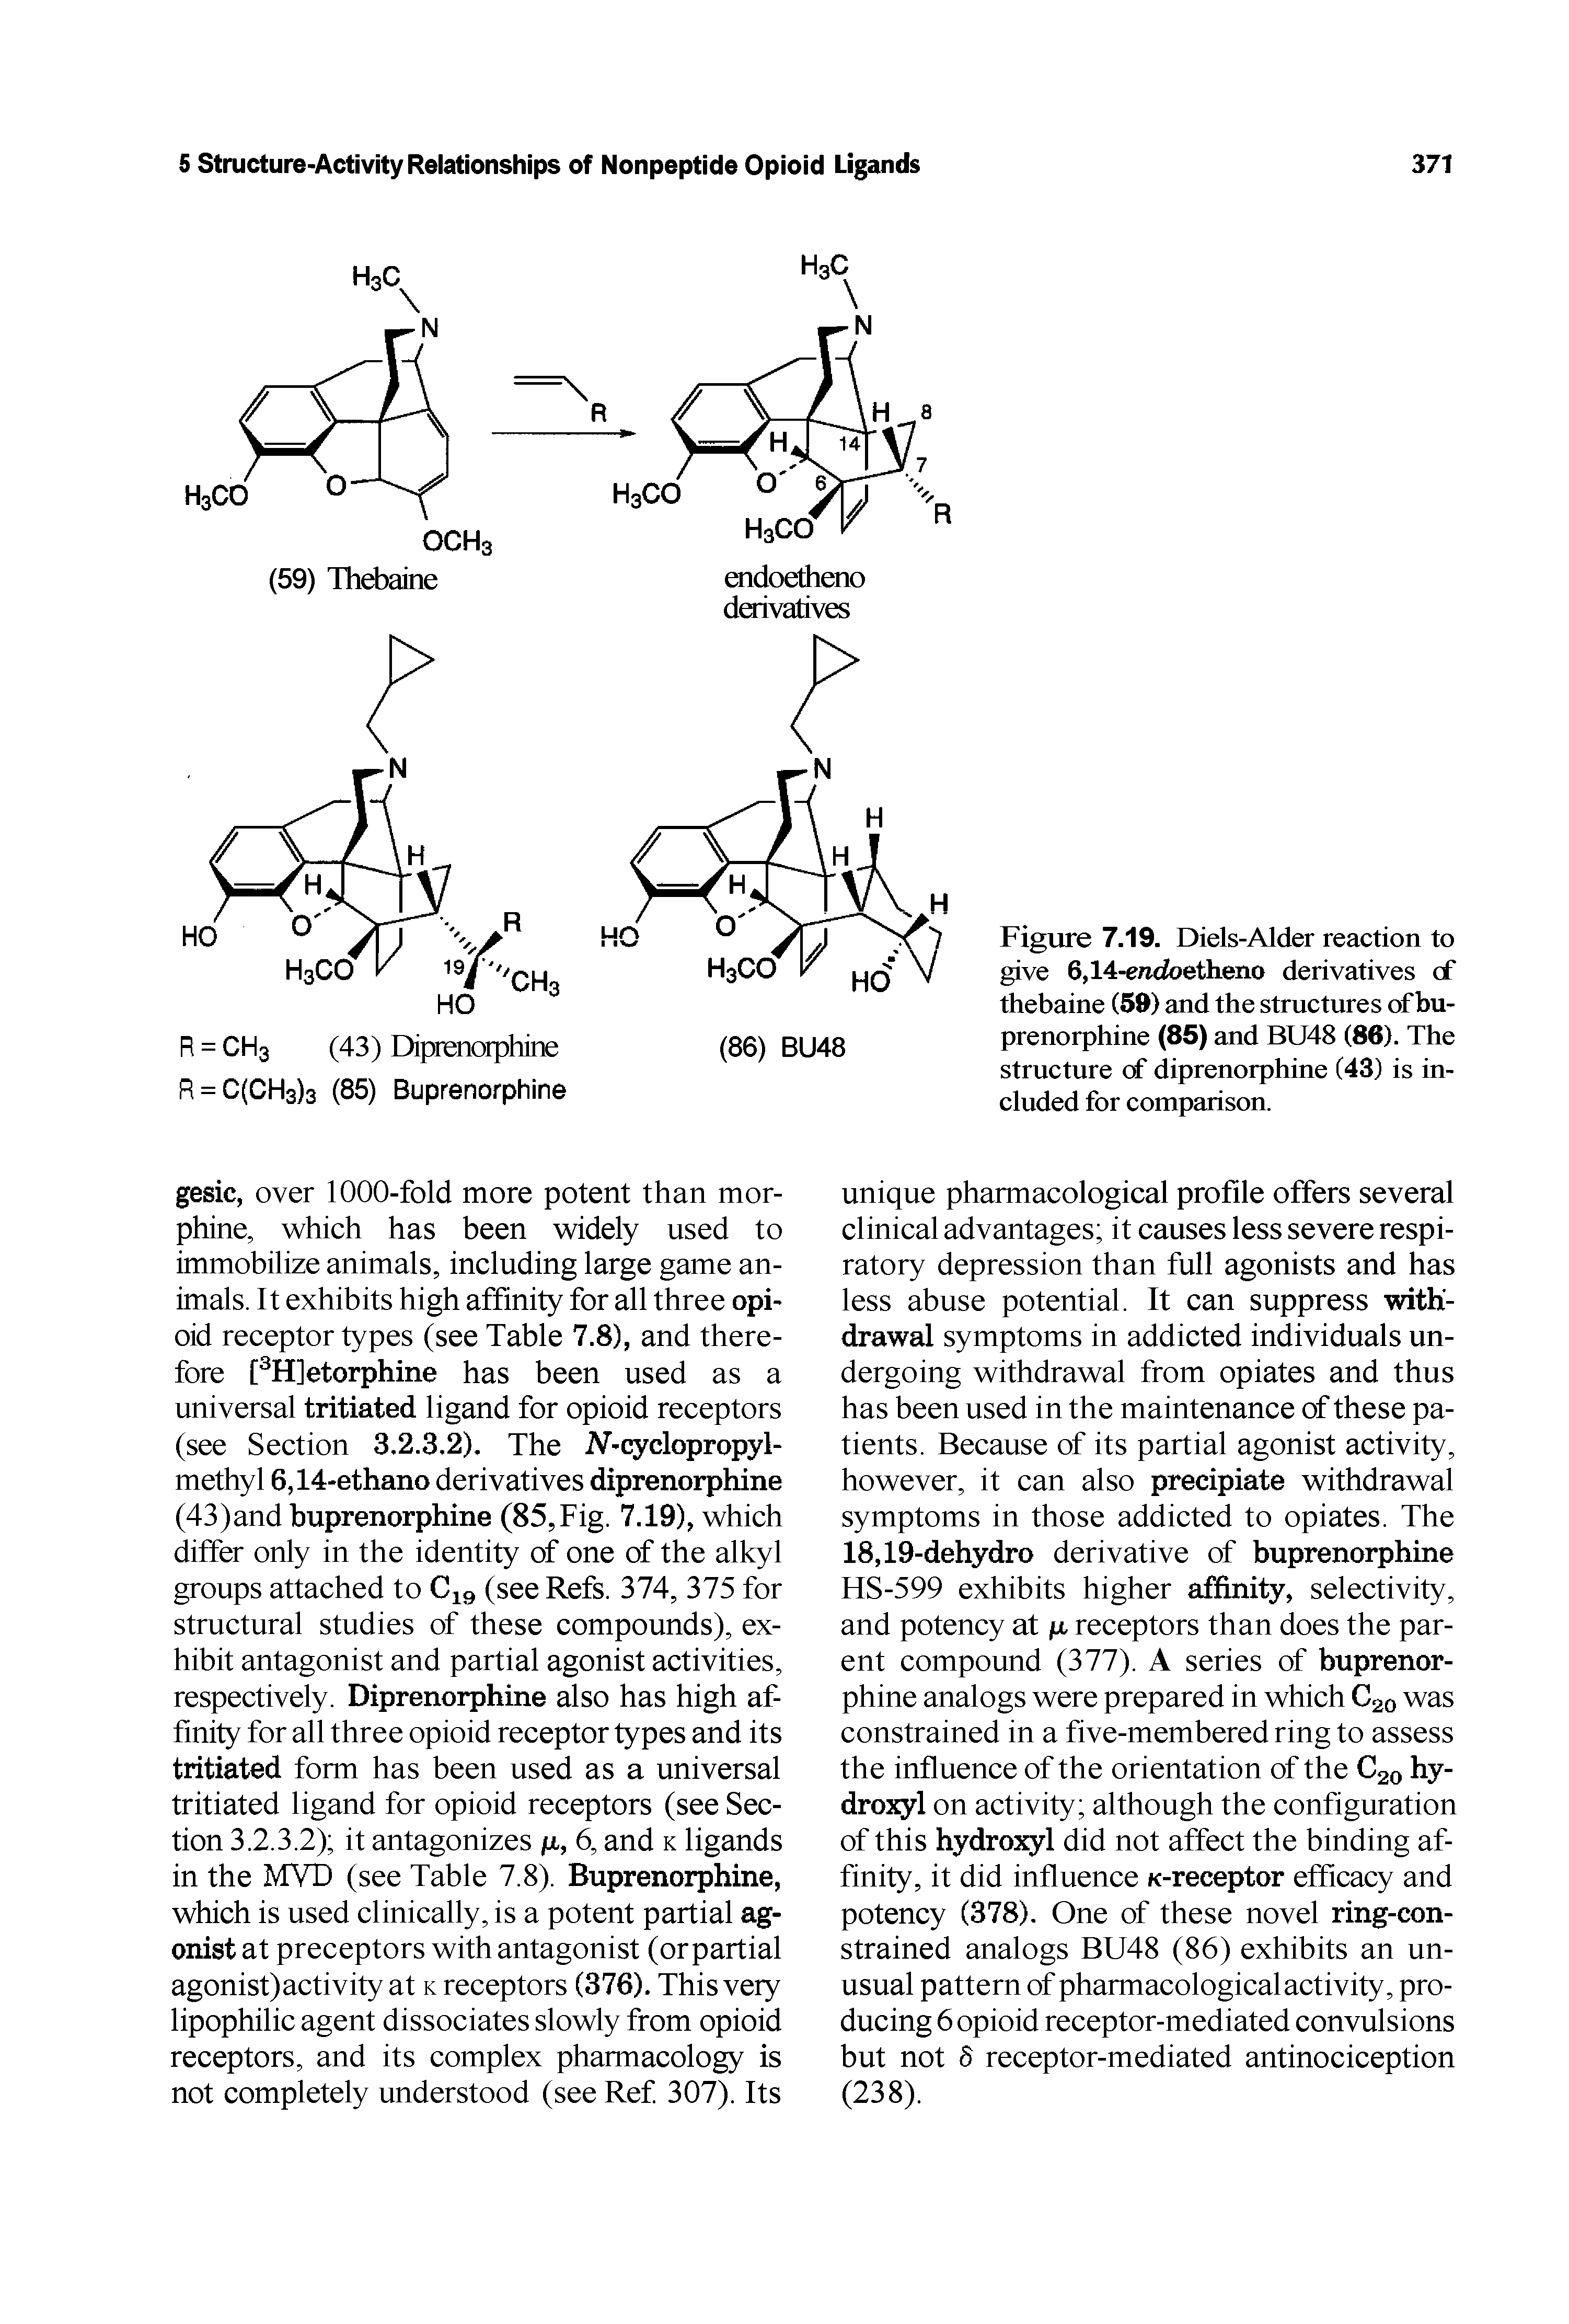 Figure 7.19. Diels-Alder reaction to give 6,14-encfoetheno derivatives cf thebaine (59) and the structures of buprenorphine (85) and BU48 (86). The structure of diprenorphine (43) is included for comparison.